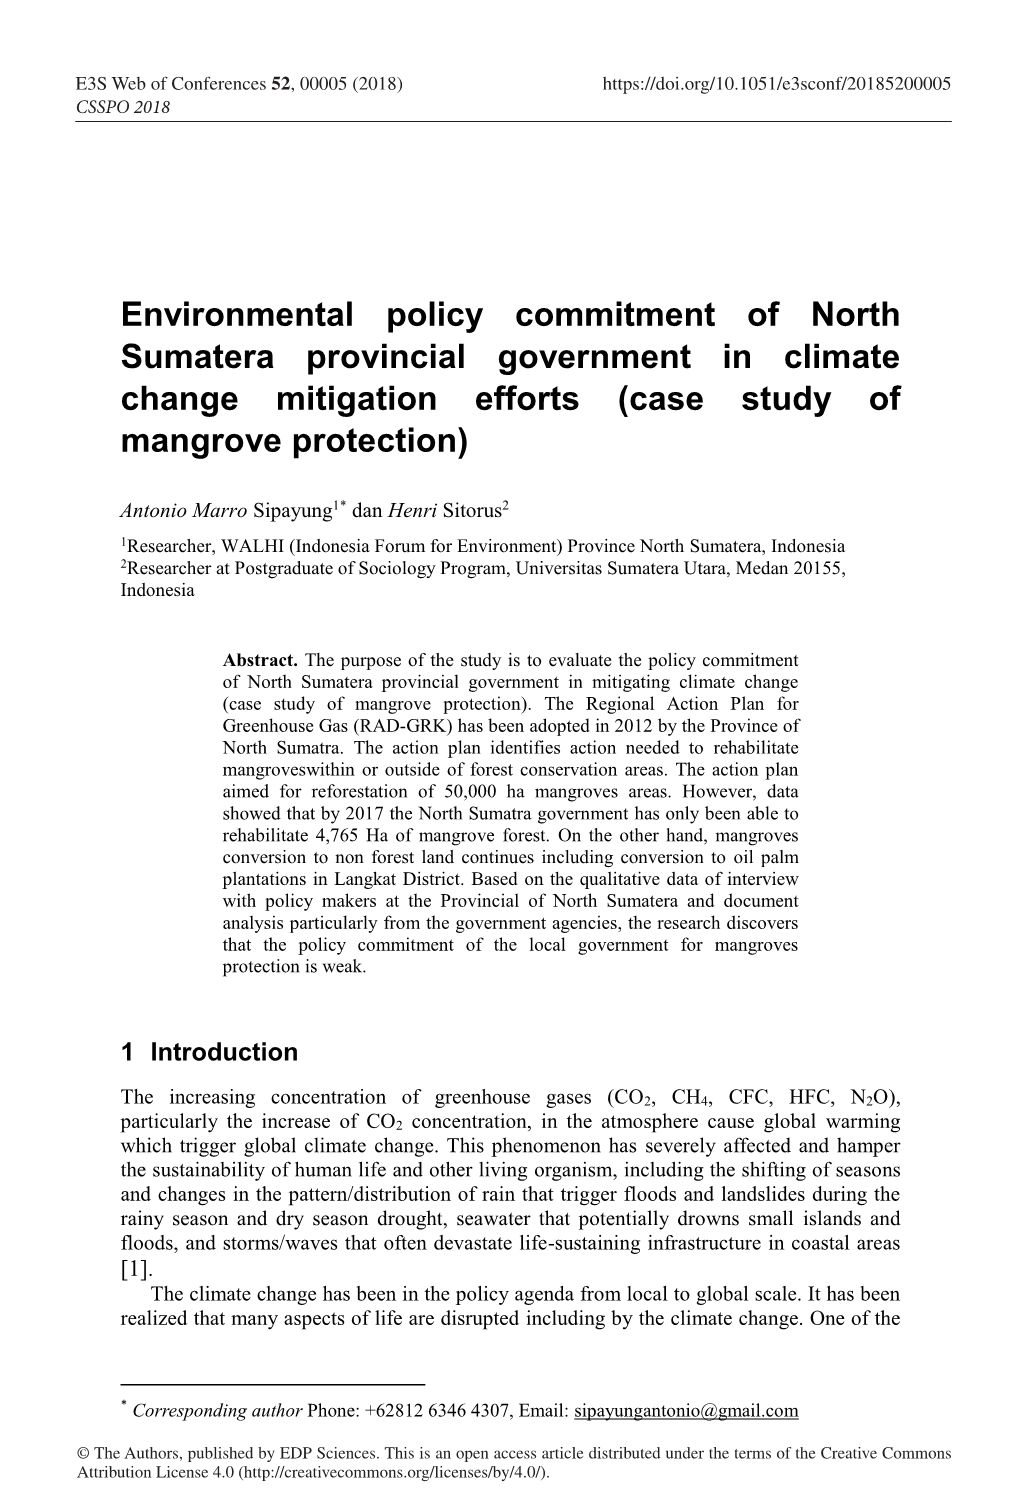 Environmental Policy Commitment of North Sumatera Provincial Government in Climate Change Mitigation Efforts (Case Study of Mangrove Protection)